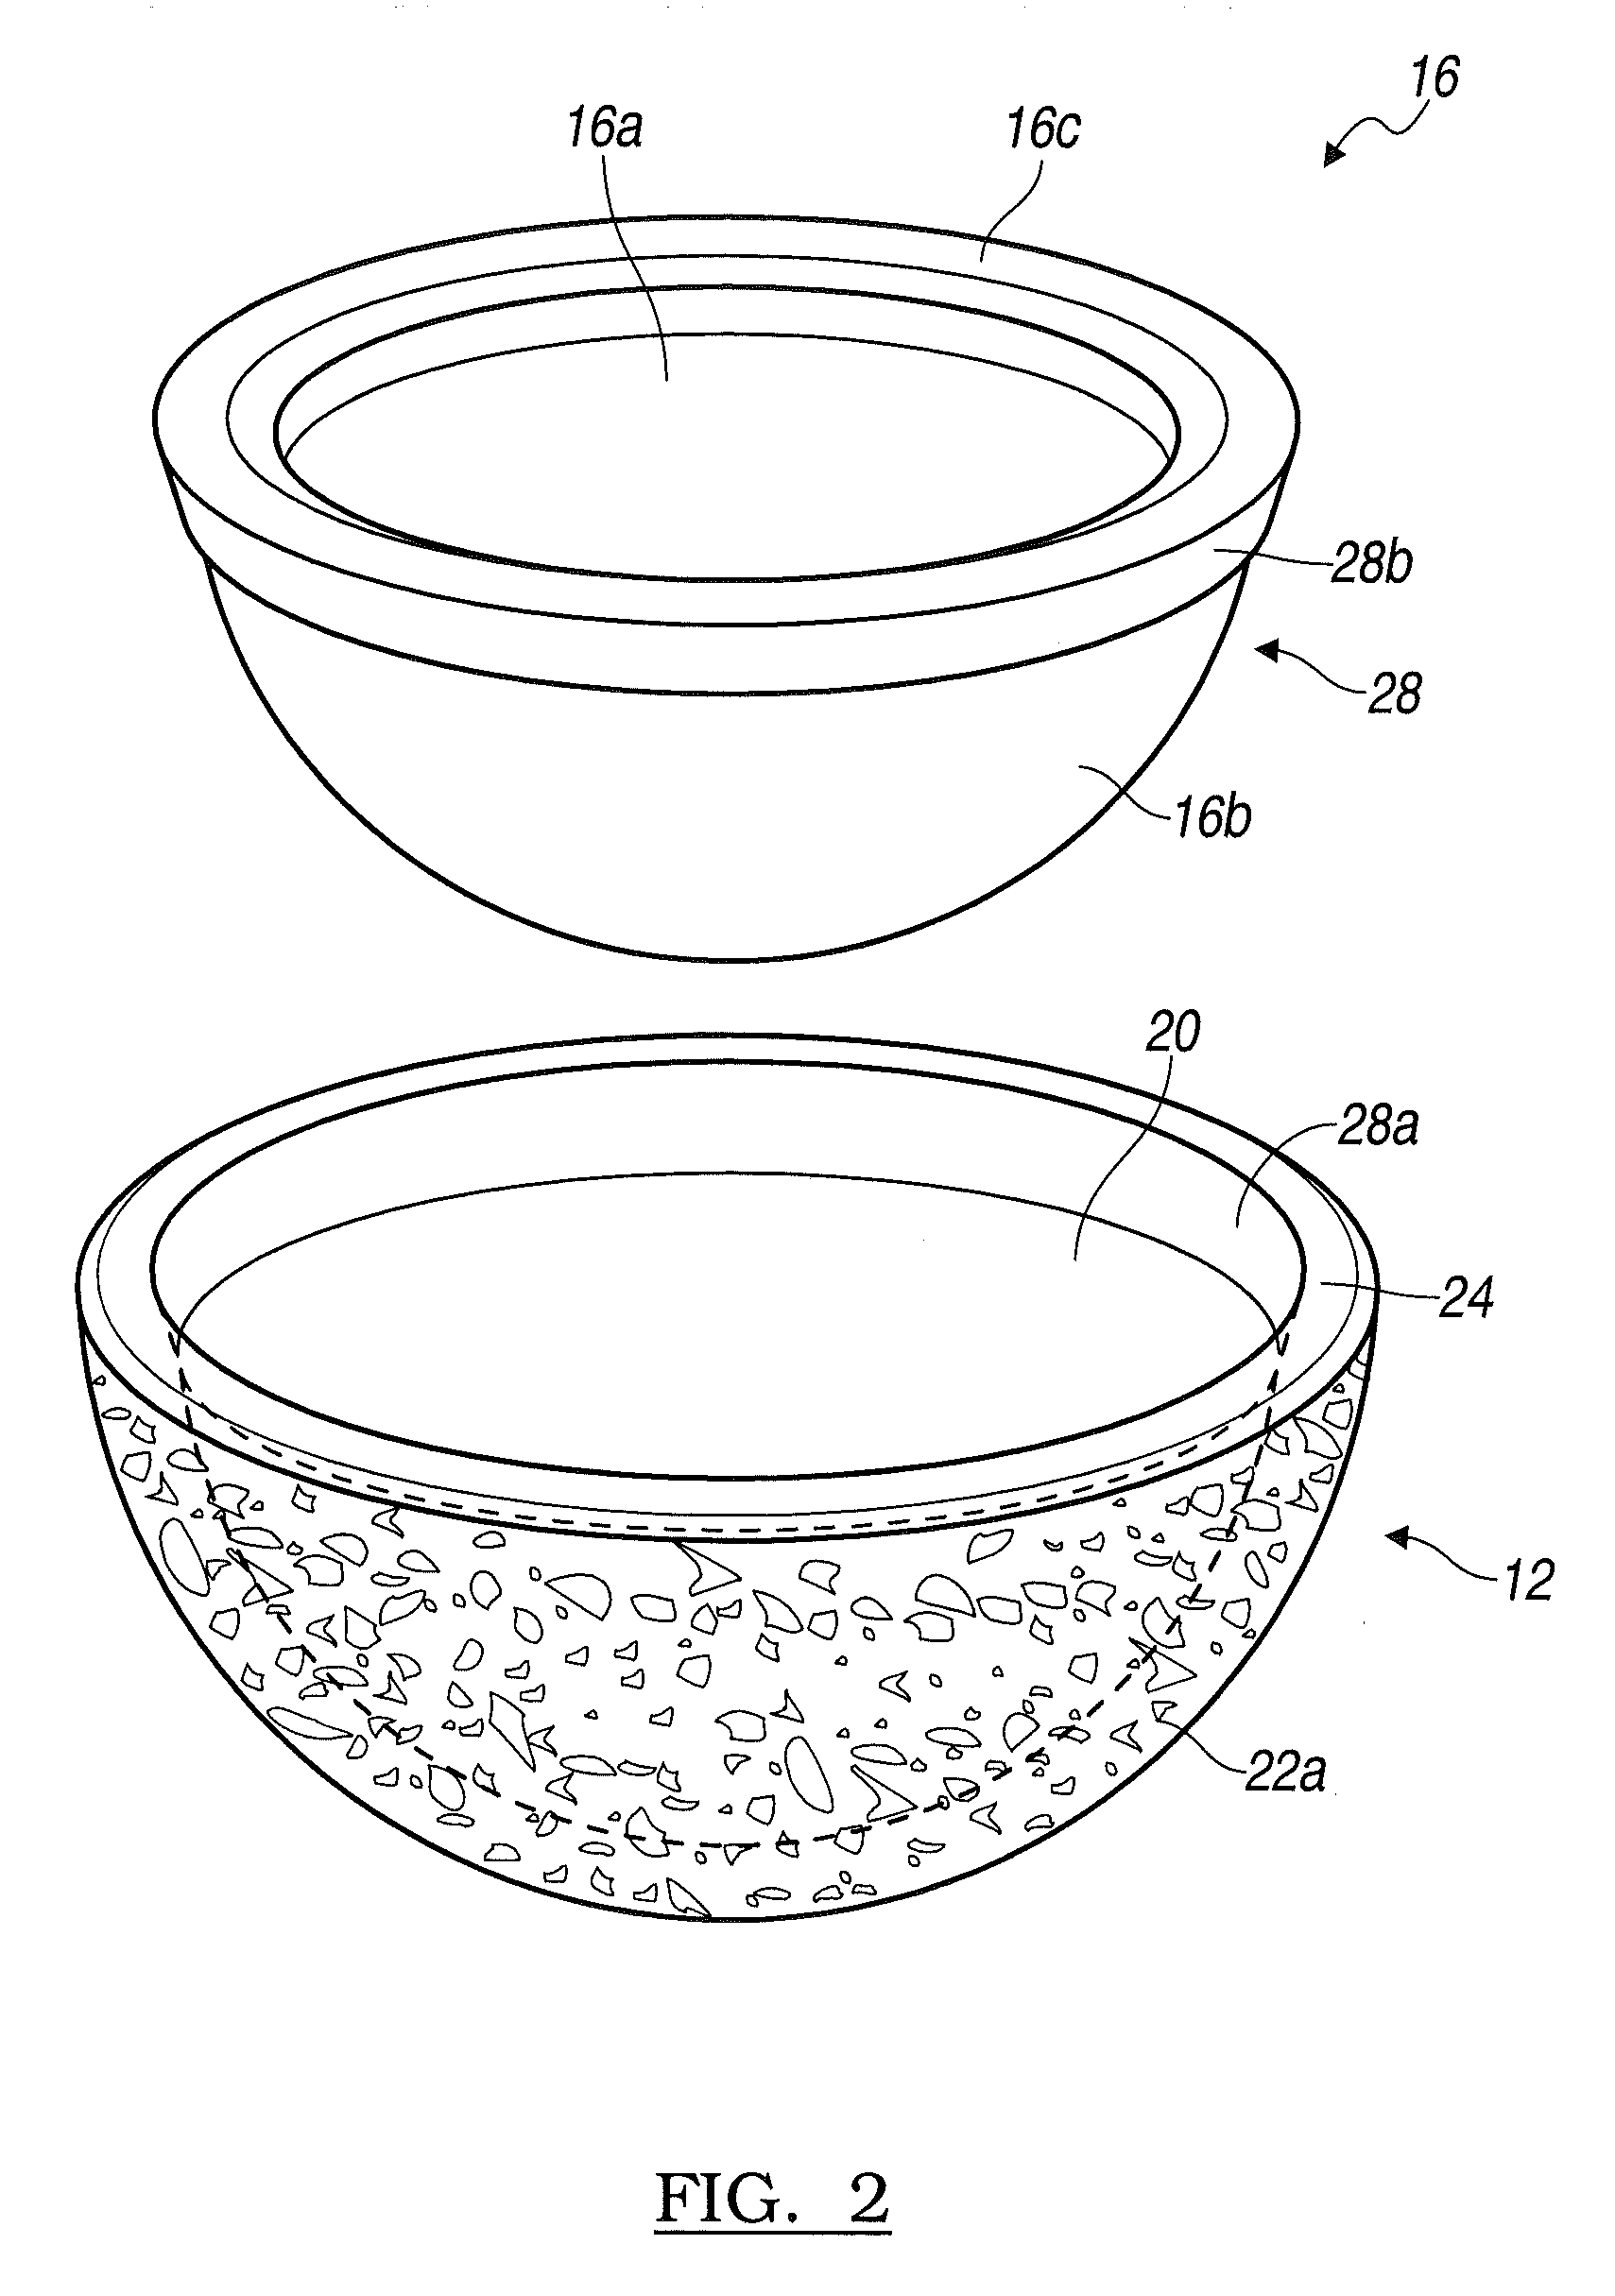 System and Method for Acetabular Cup